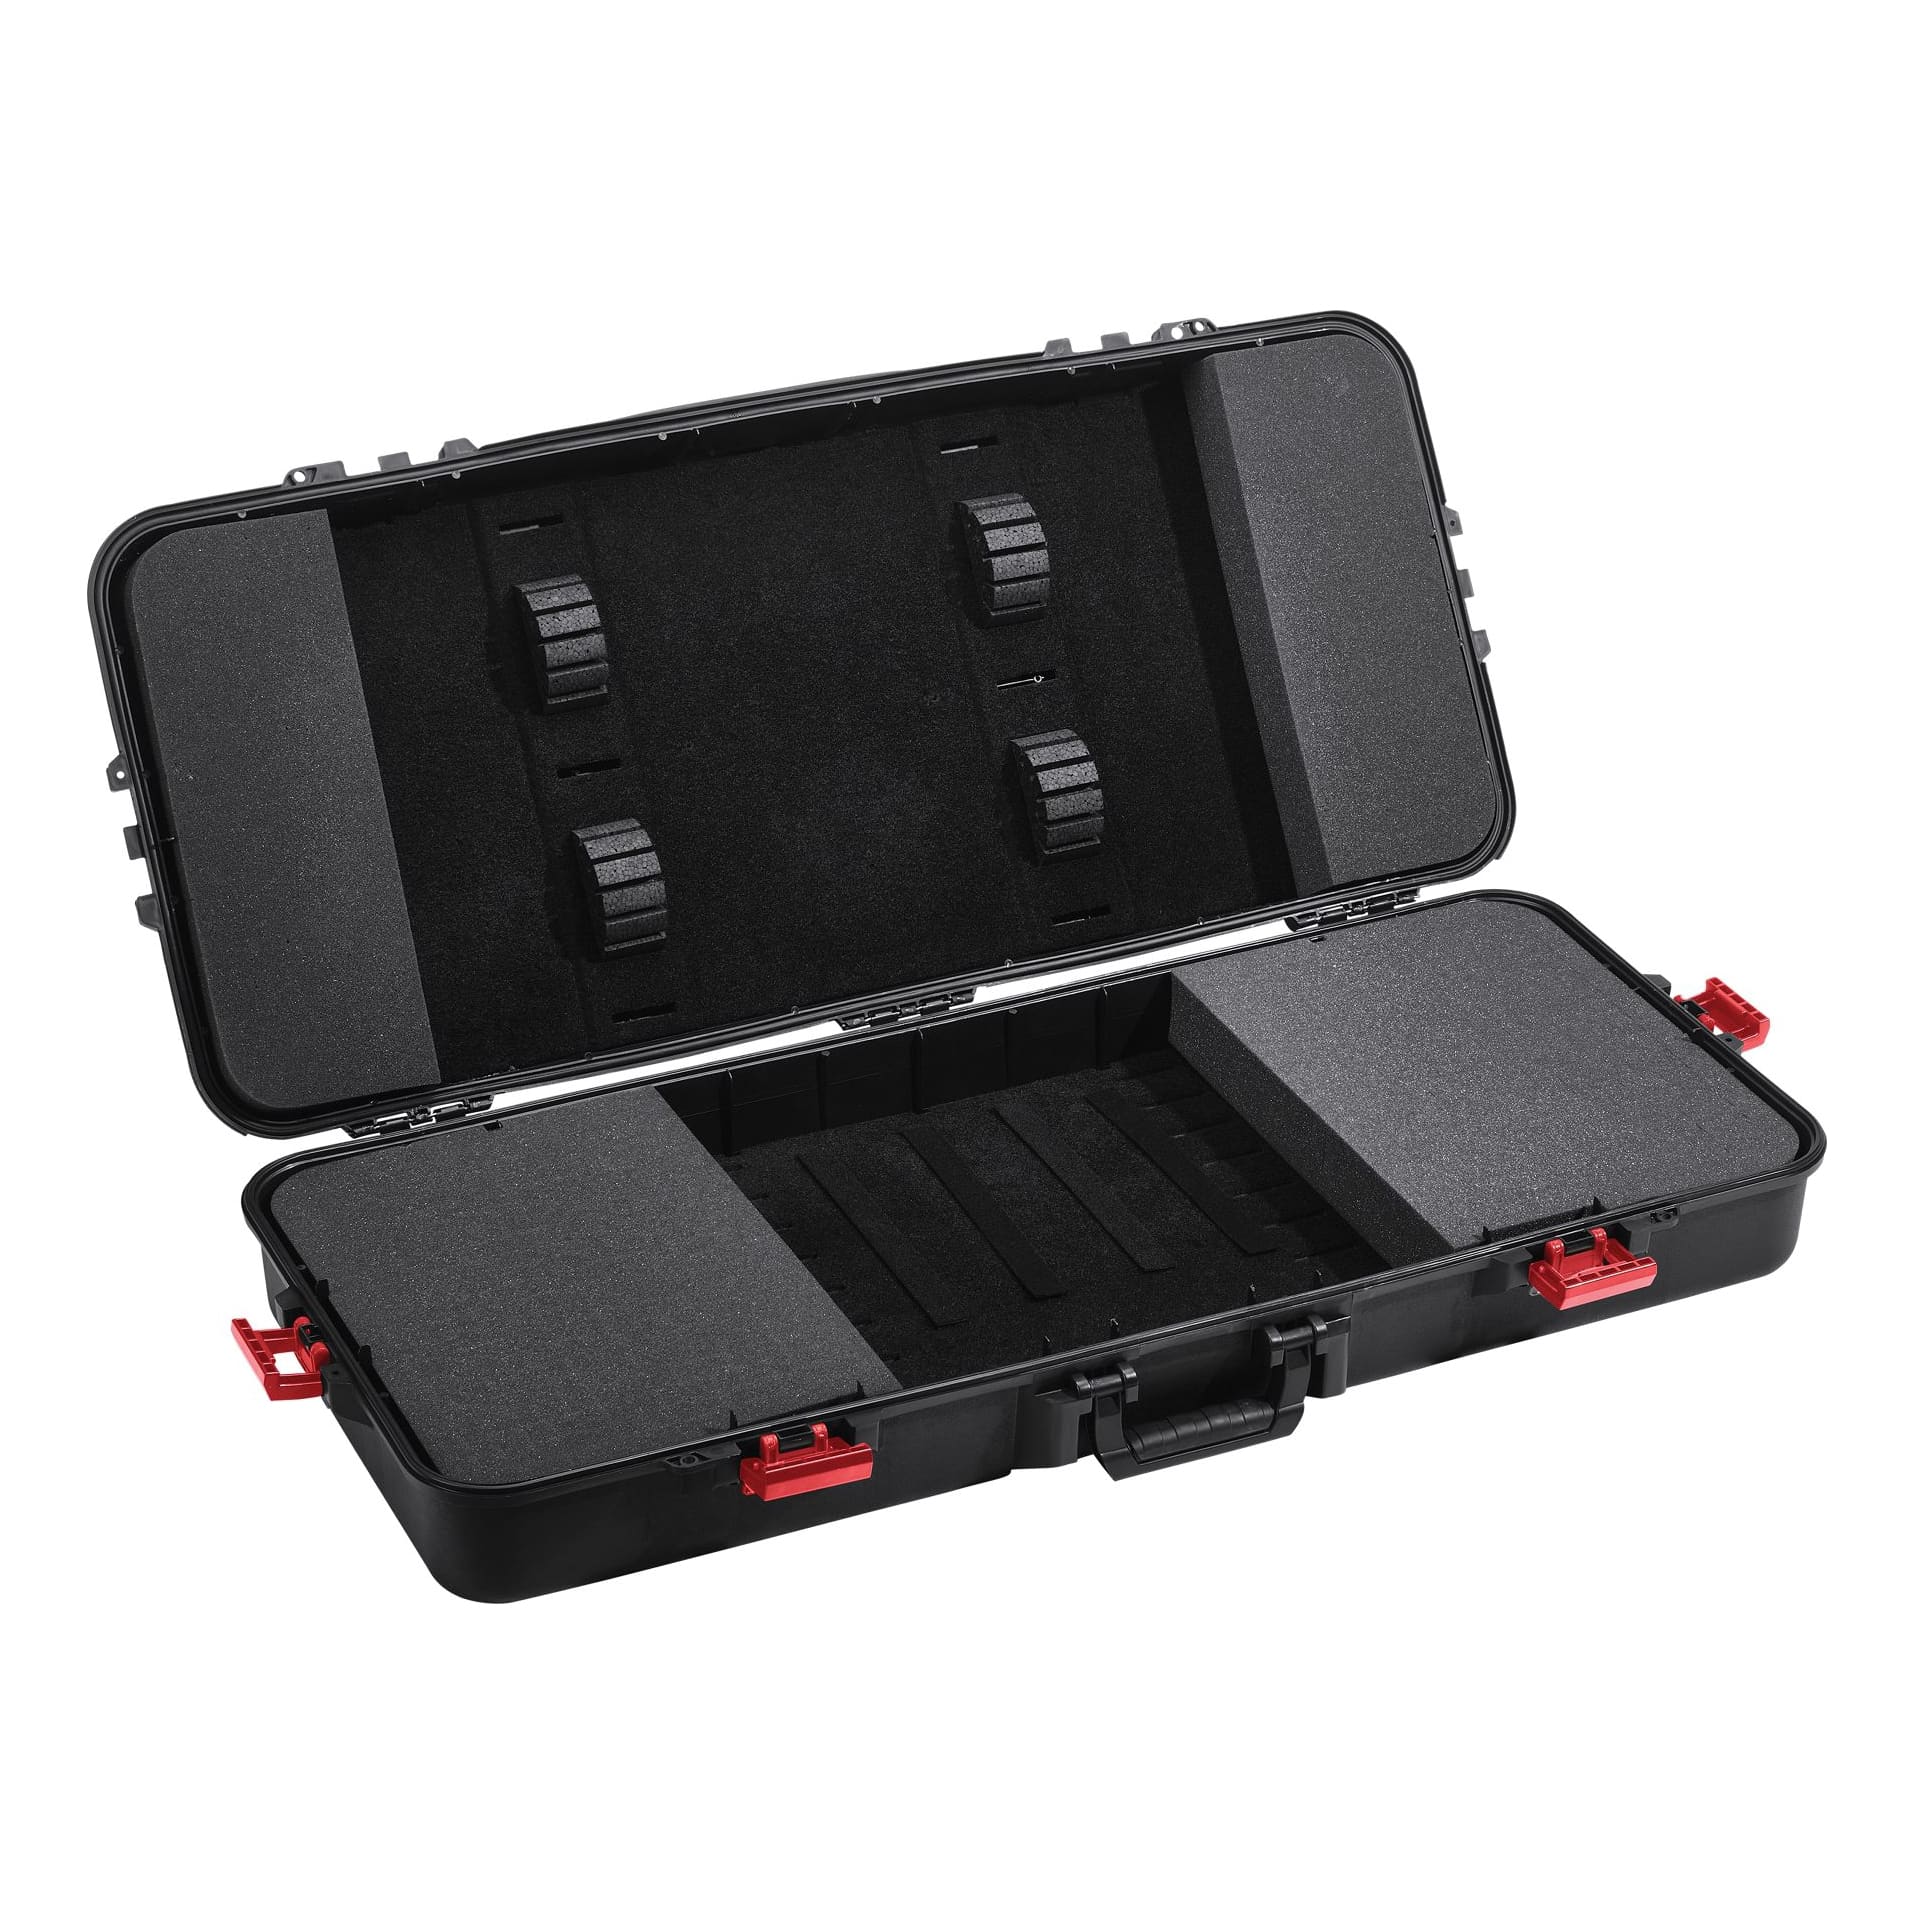 BlackOut® All-Weather Series™ Compound Bow Case